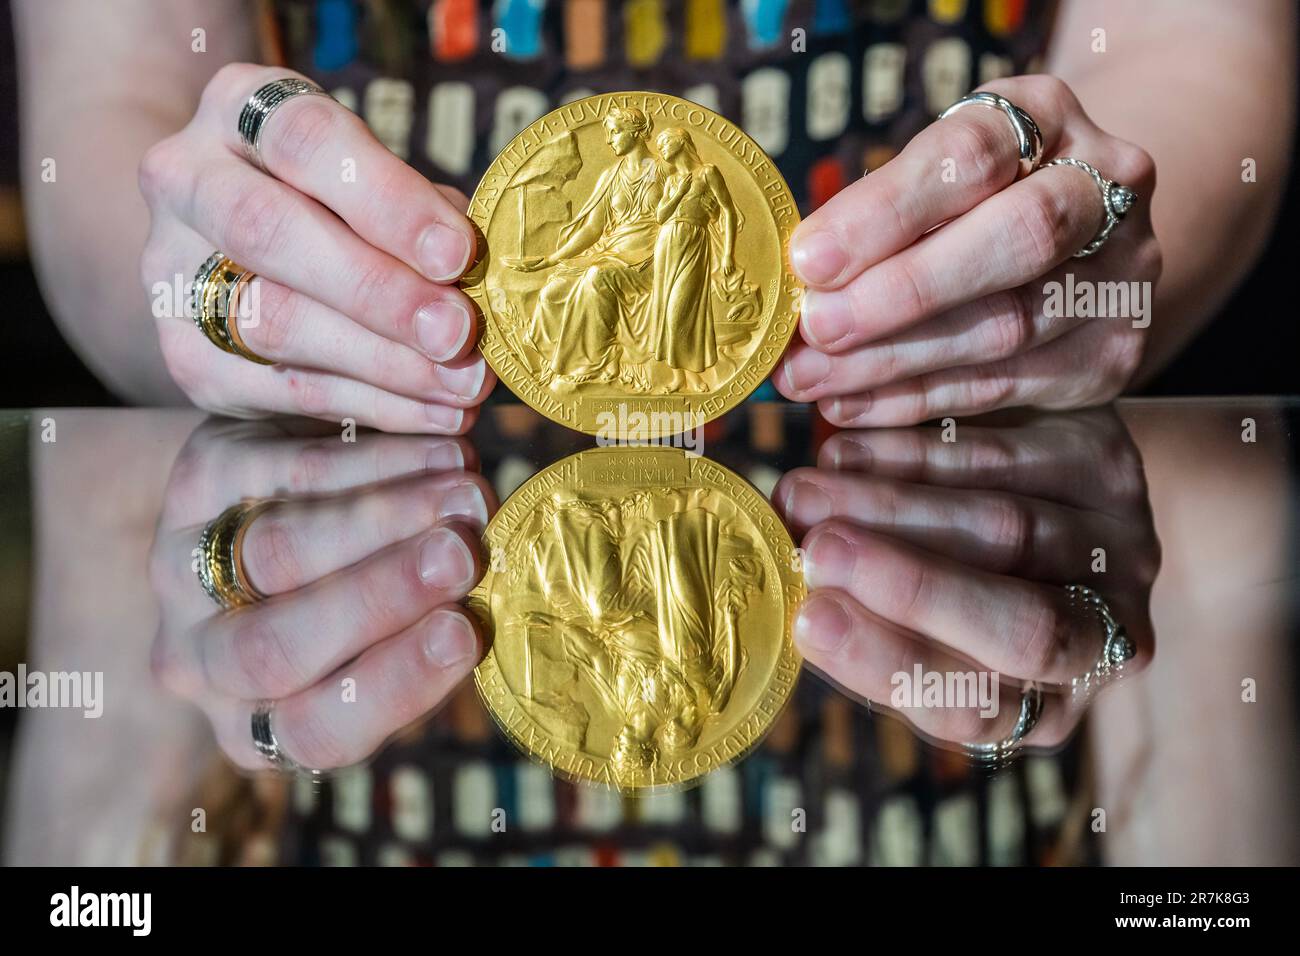 London, UK. 16th June, 2023. Ernst Chain's Nobel Prize medal in Physiology or Medicine for his work on Penicillin, Estimate: £300,000-500,000. Fine Books and Manuscripts sale at Bonhams Knightsbridge. Credit: Guy Bell/Alamy Live News Stock Photo